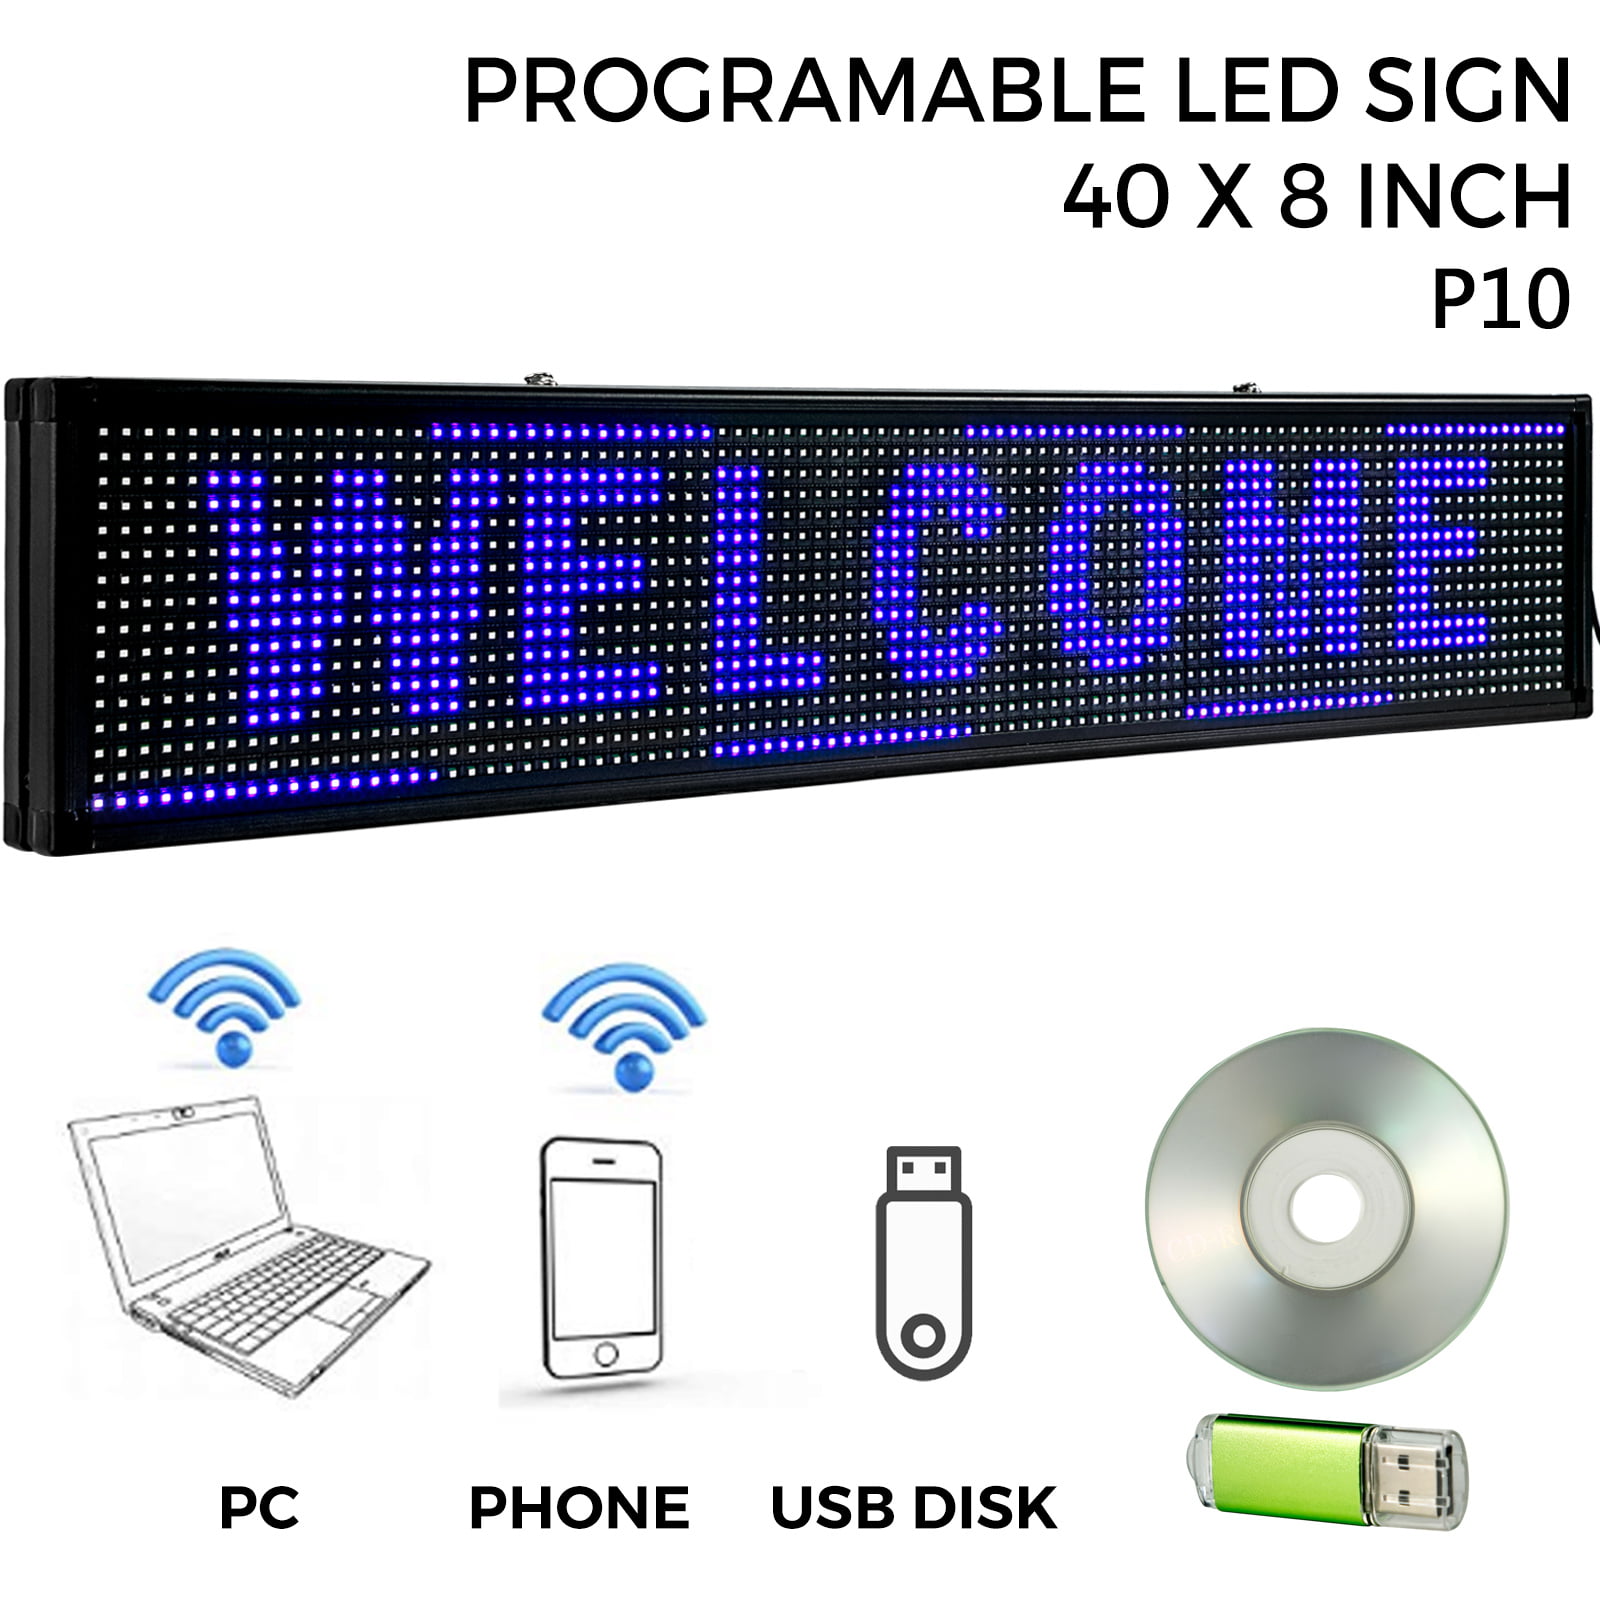 Details about   P10 40x 8 inch Full Color LED Sign Programmable Scrolling Message Display Banner 